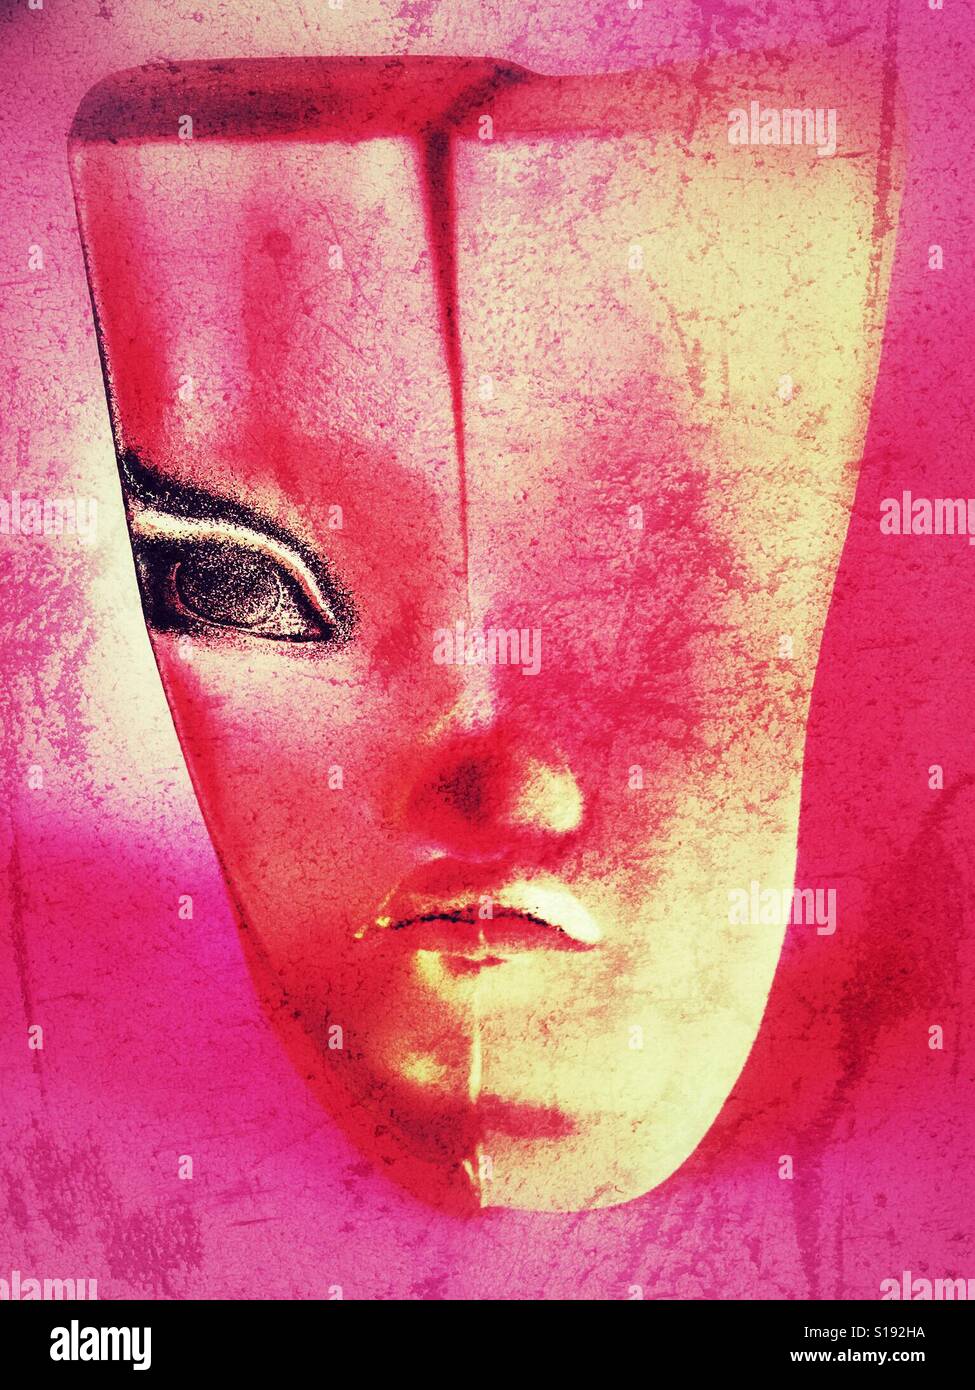 Red and pink treatment of a Mats Jonasson glass sculpture of a woman's face  or mask Stock Photo - Alamy